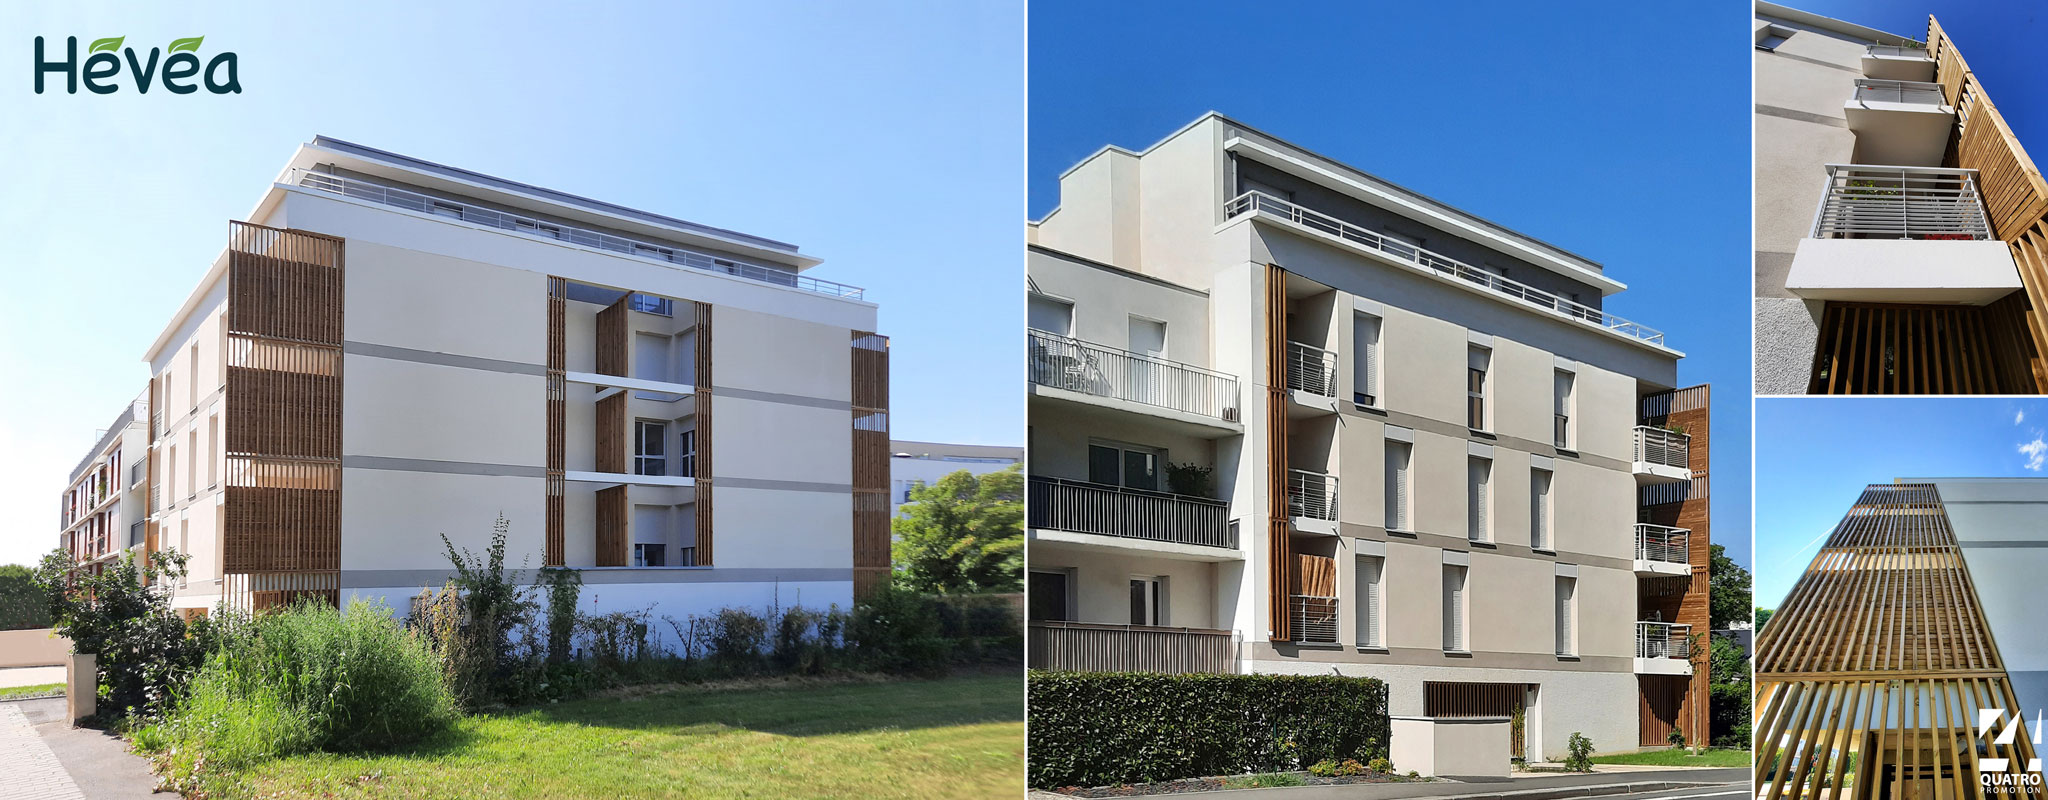 programme immobilier neuf